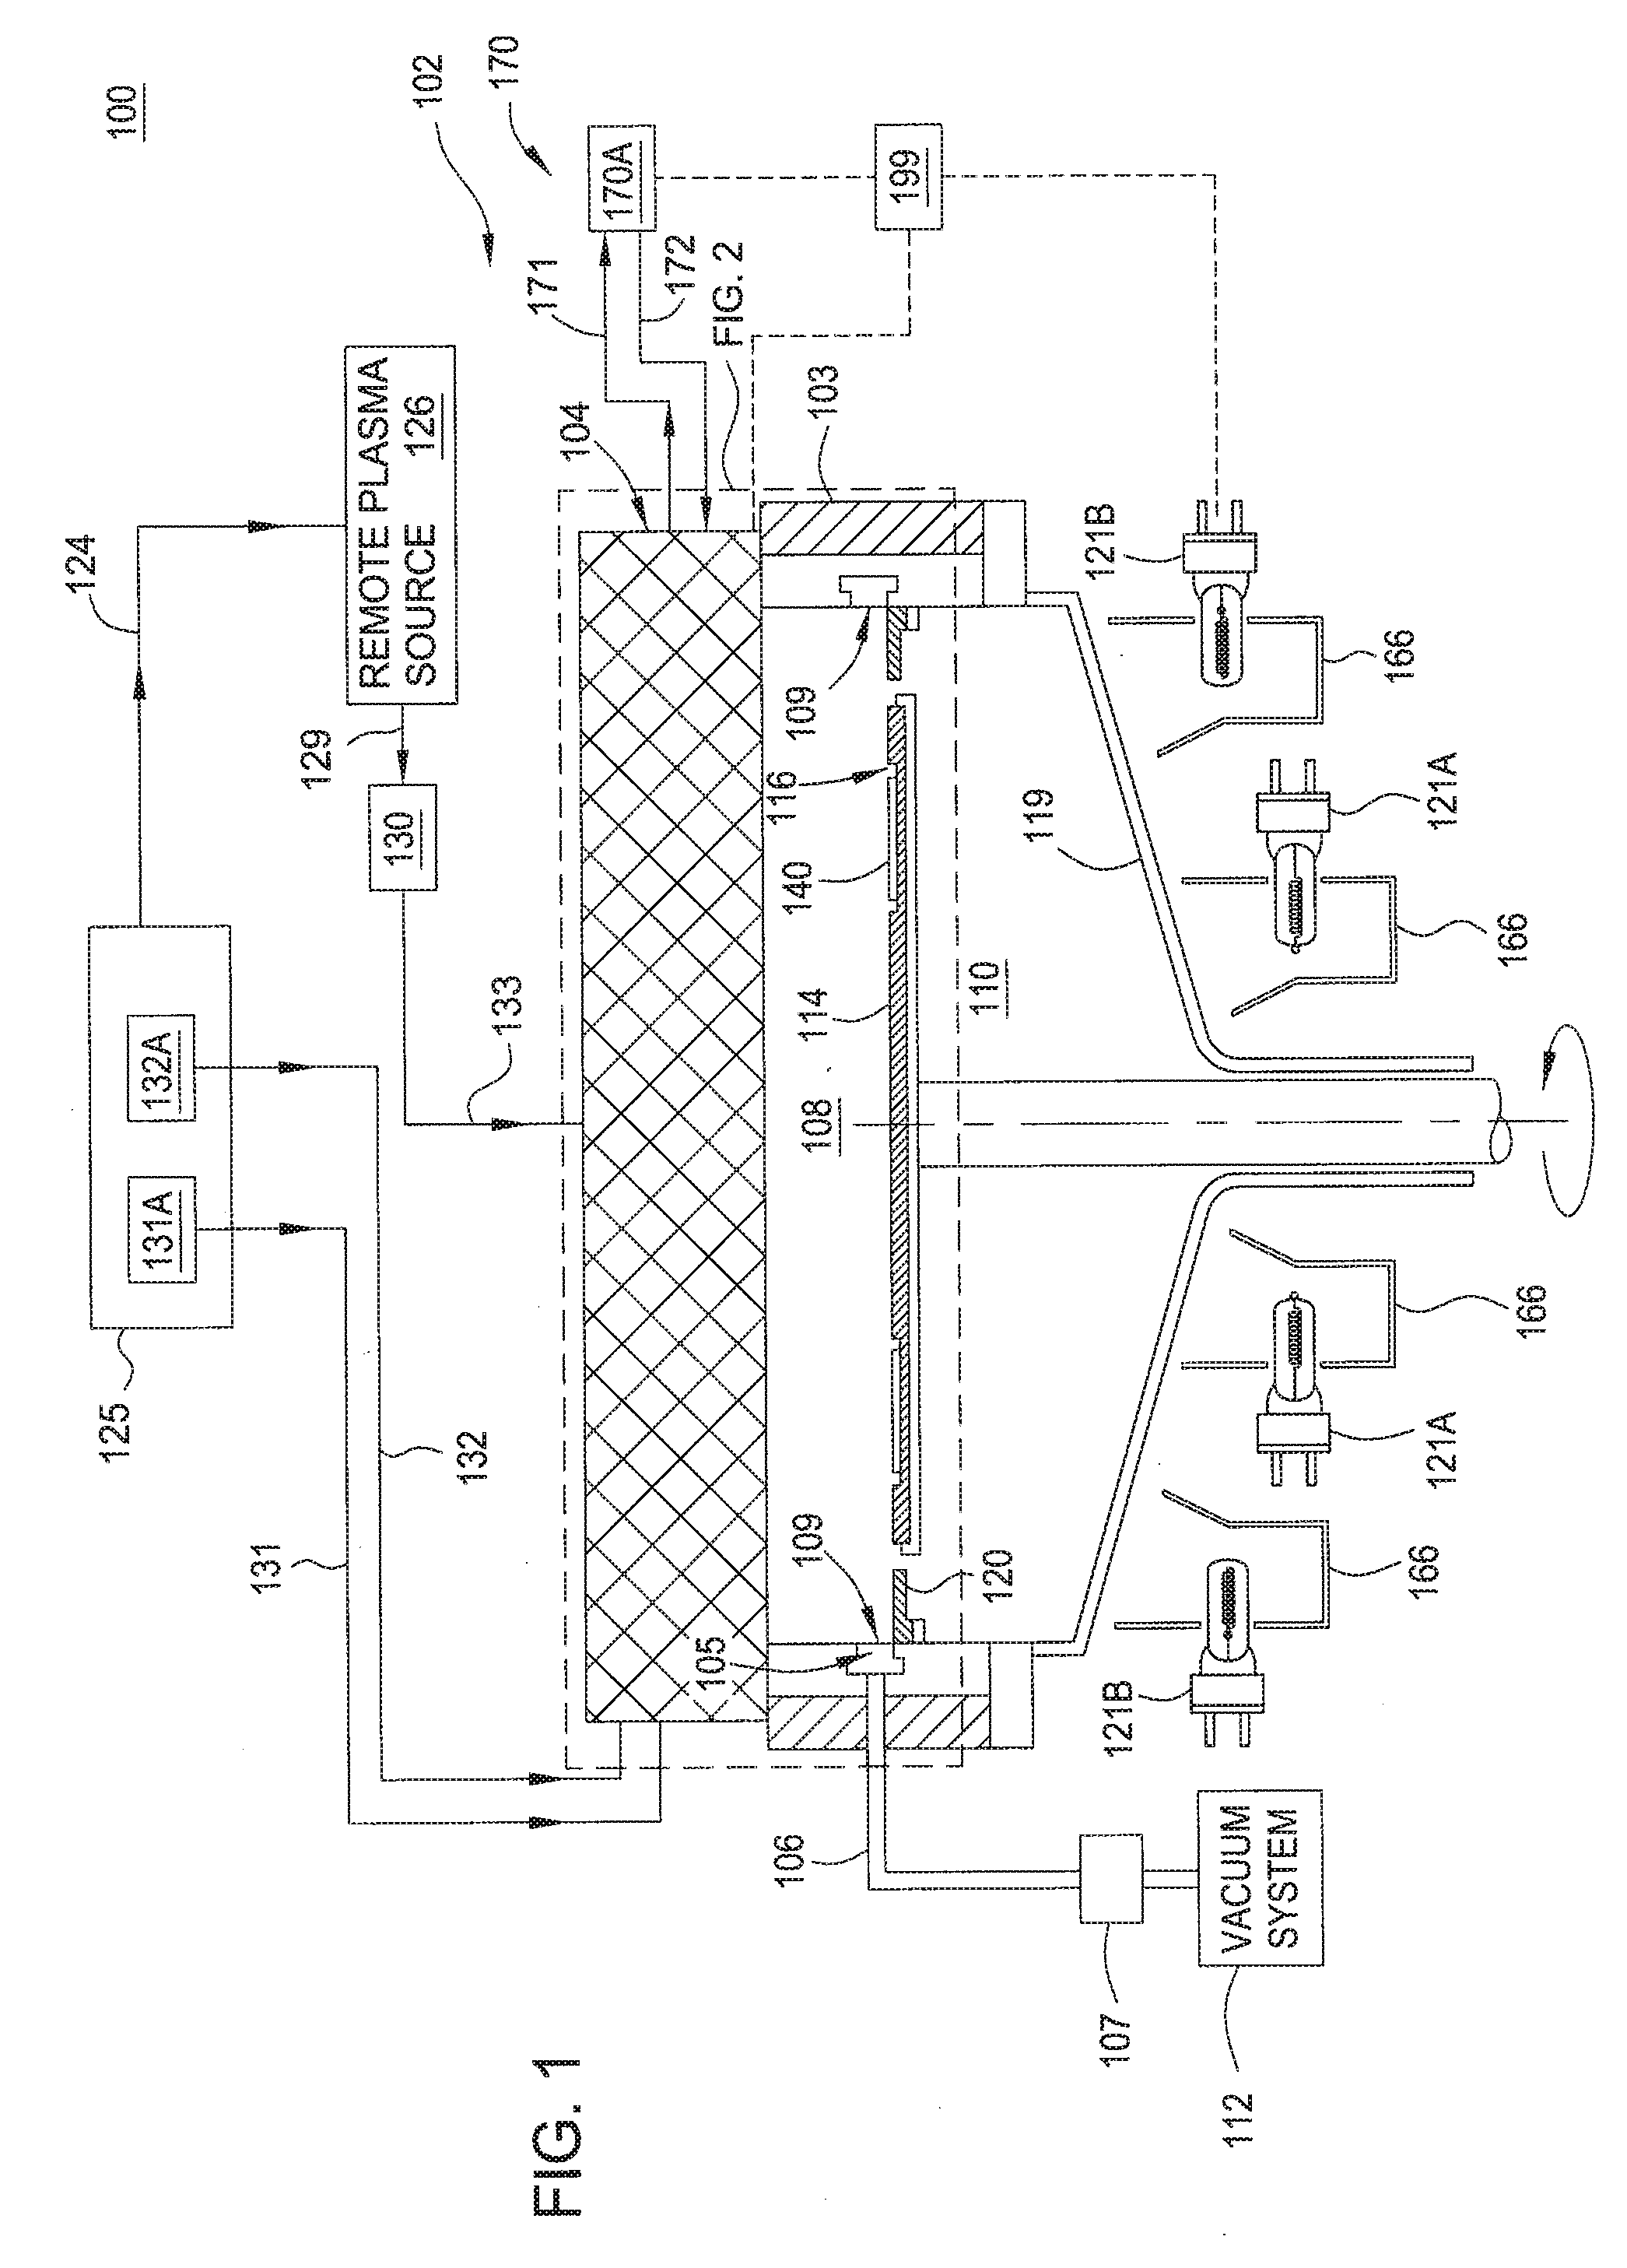 Multi-gas centrally cooled showerhead design